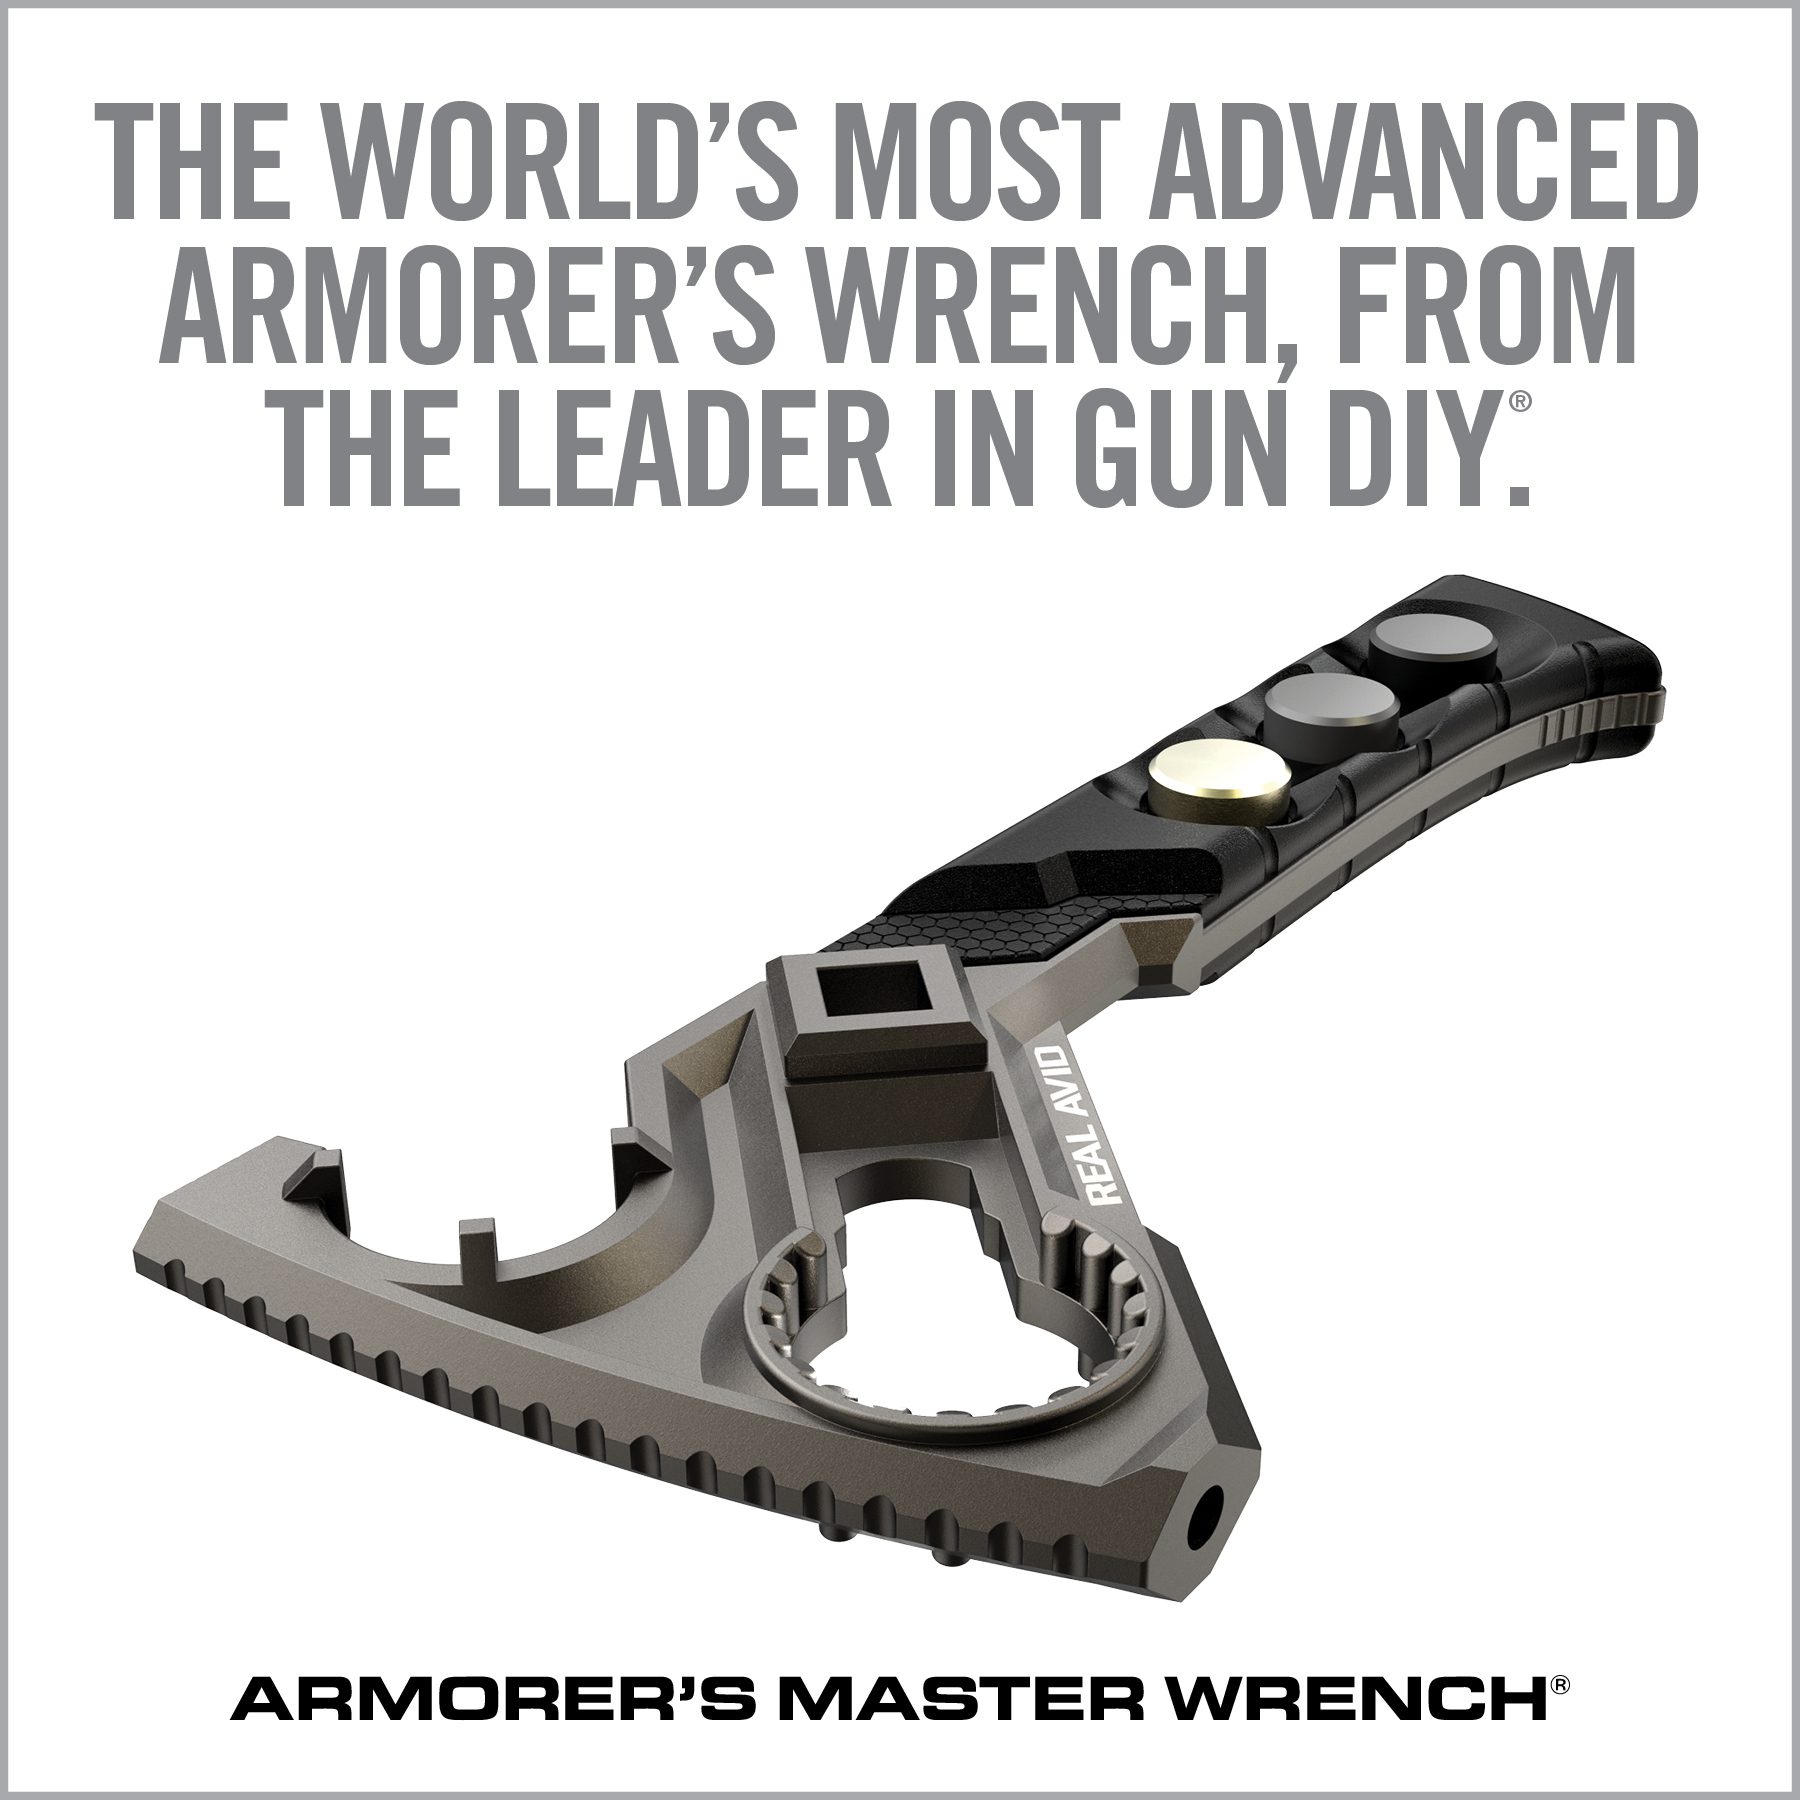 an advertisement for the world's most advanced armorer's wrench from the leader in gun